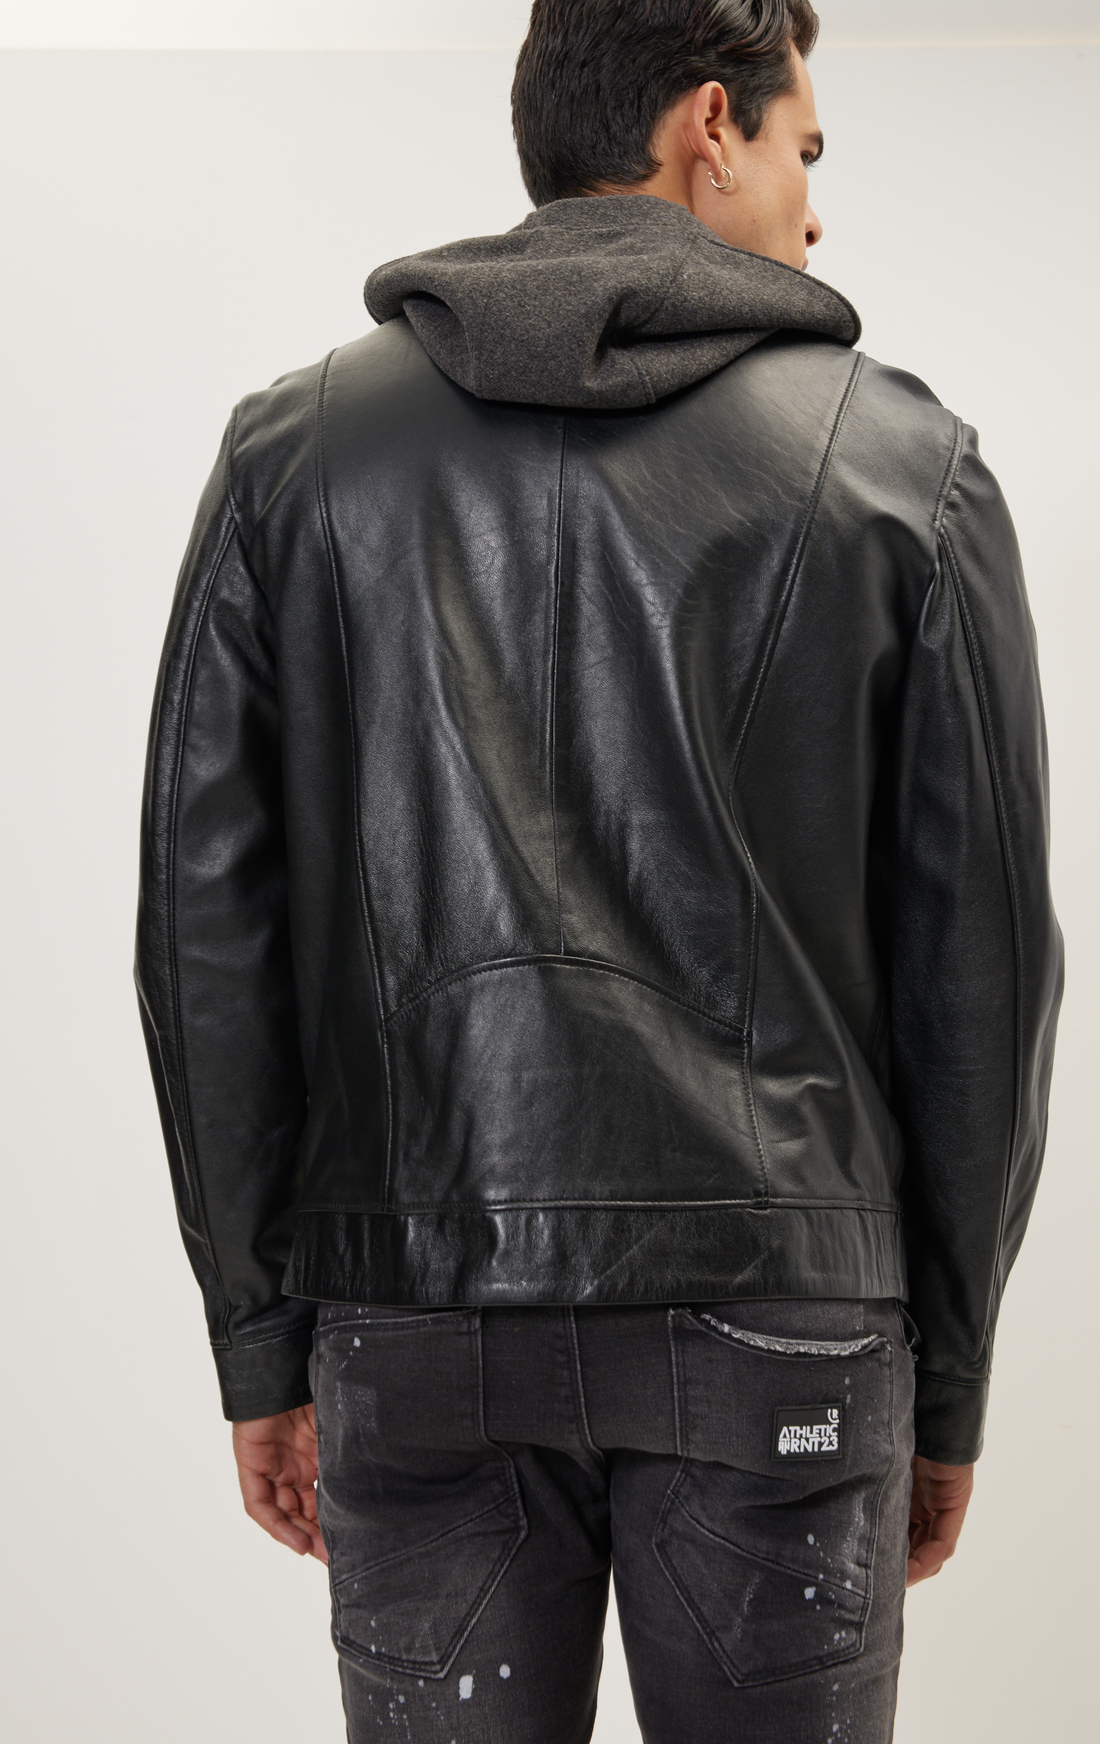 N° 71185 GENUINE LEATHER JACKET WITH A REMOVABLE HOOD